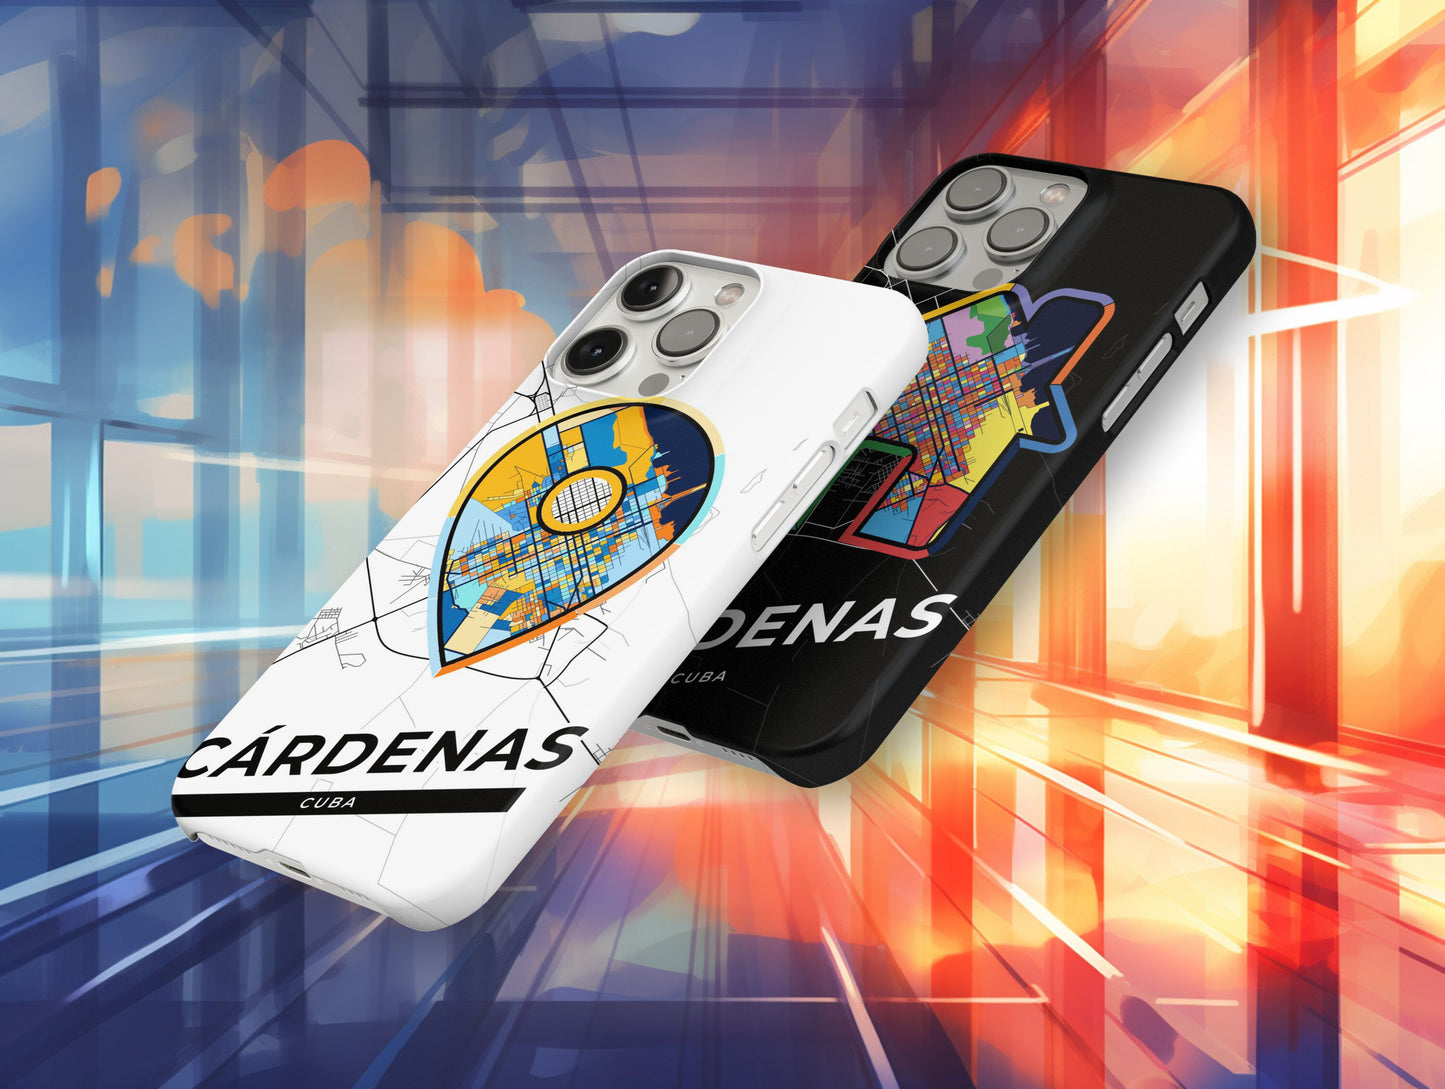 Cárdenas Cuba slim phone case with colorful icon. Birthday, wedding or housewarming gift. Couple match cases.